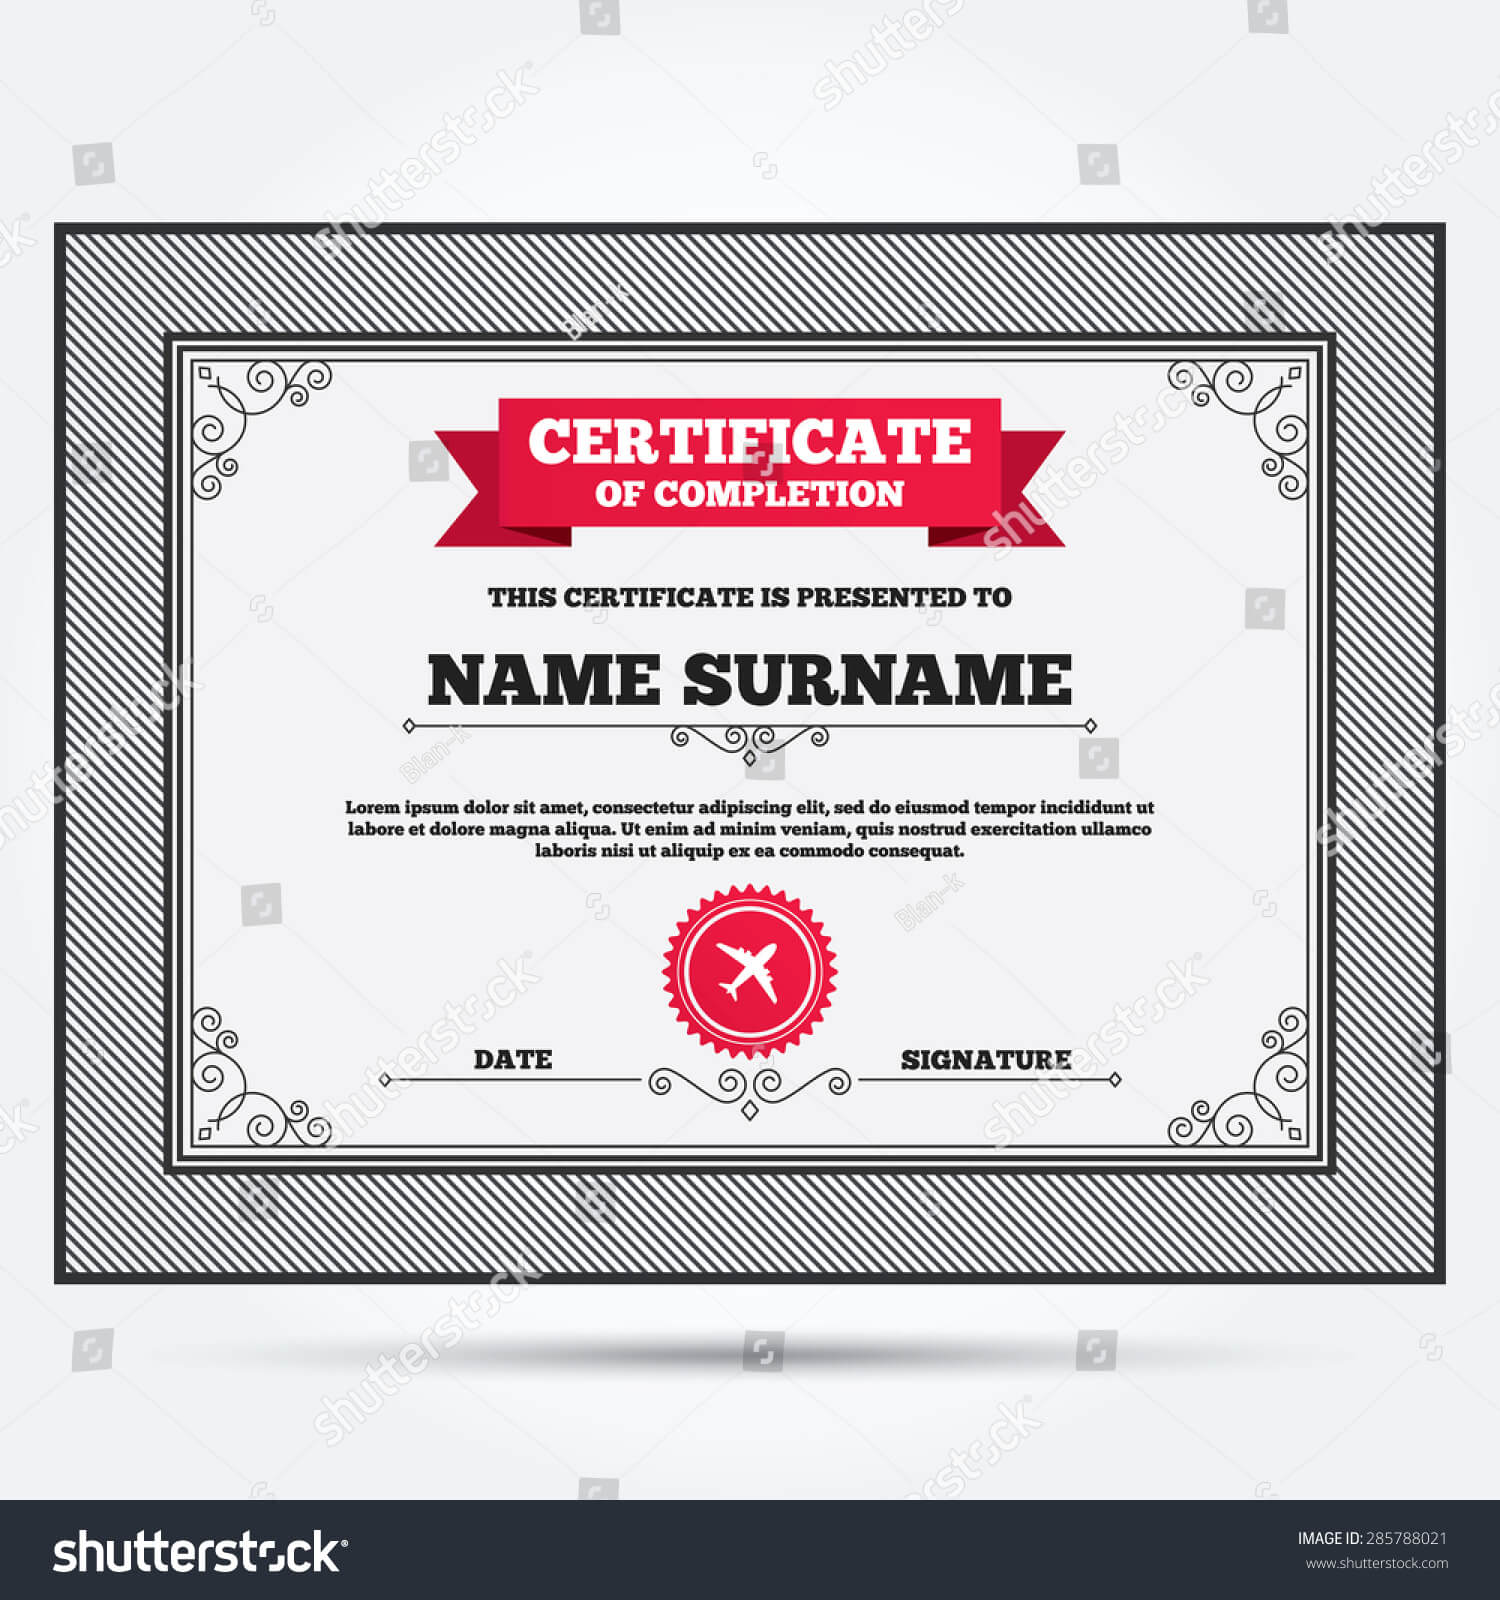 Certificates Of Completion Template ] – Certificate Of Throughout Sales Certificate Template